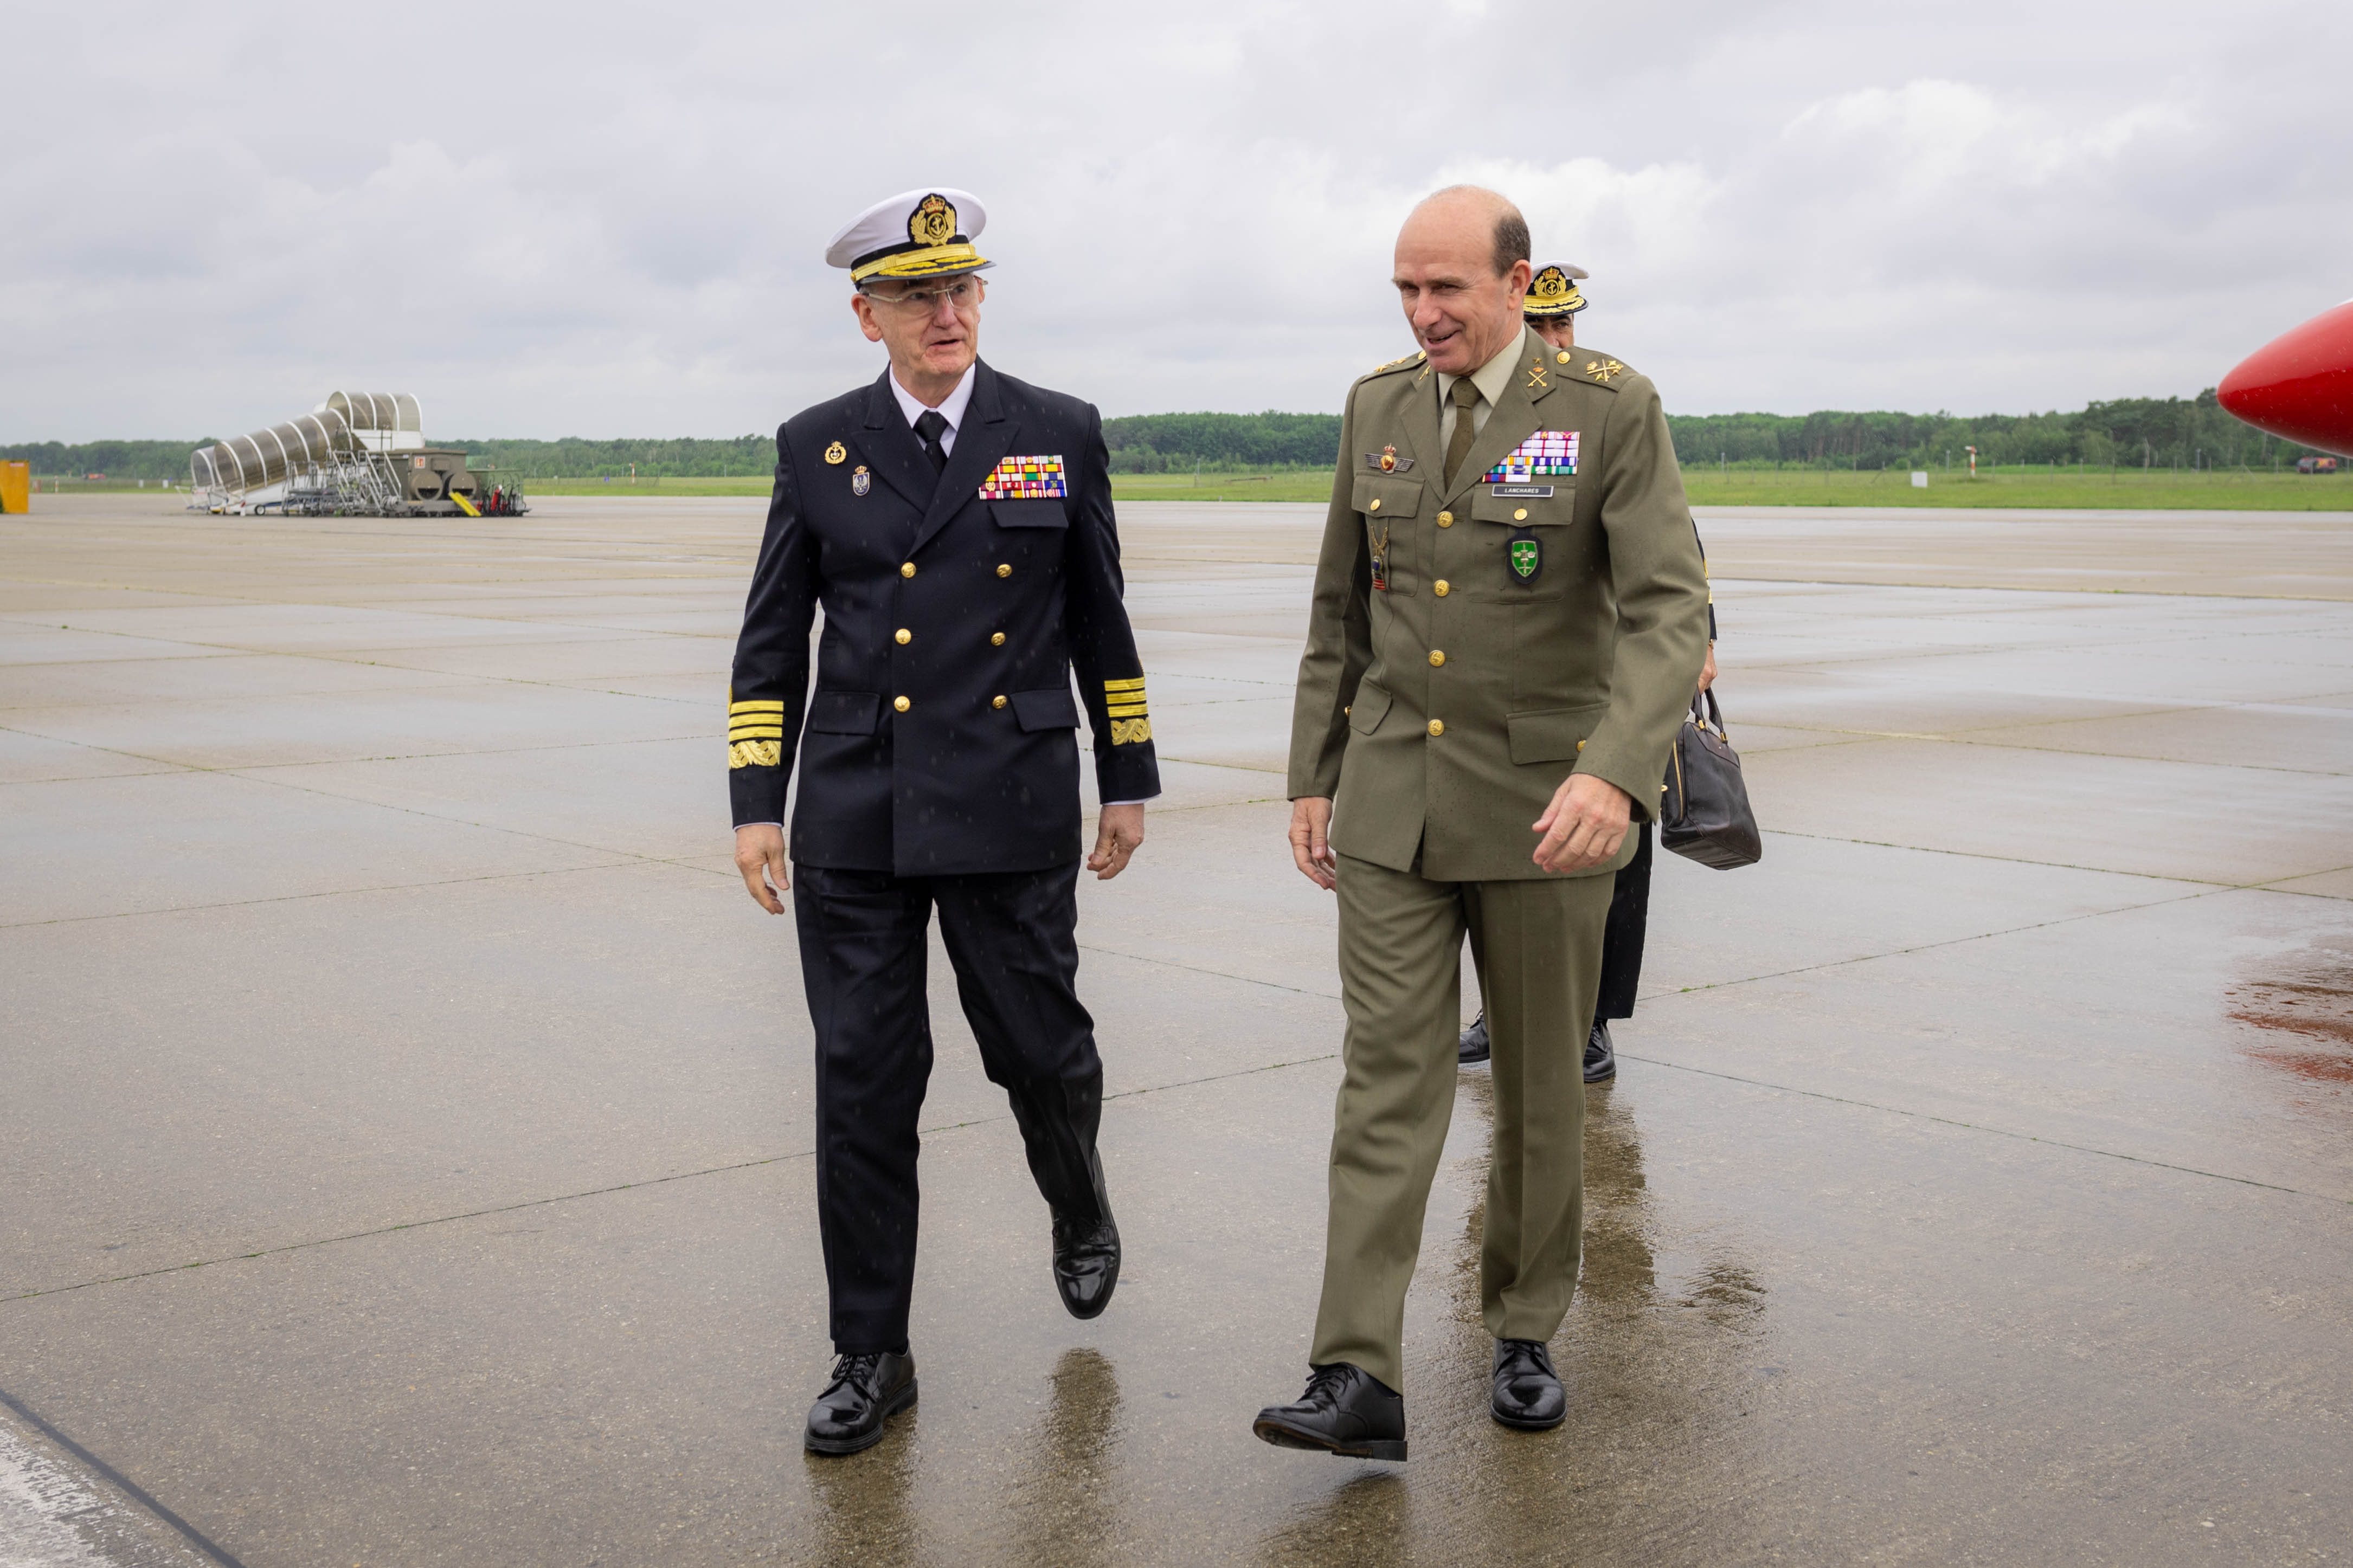 Spanish CHOD was received by Lieutenant General Lanchares